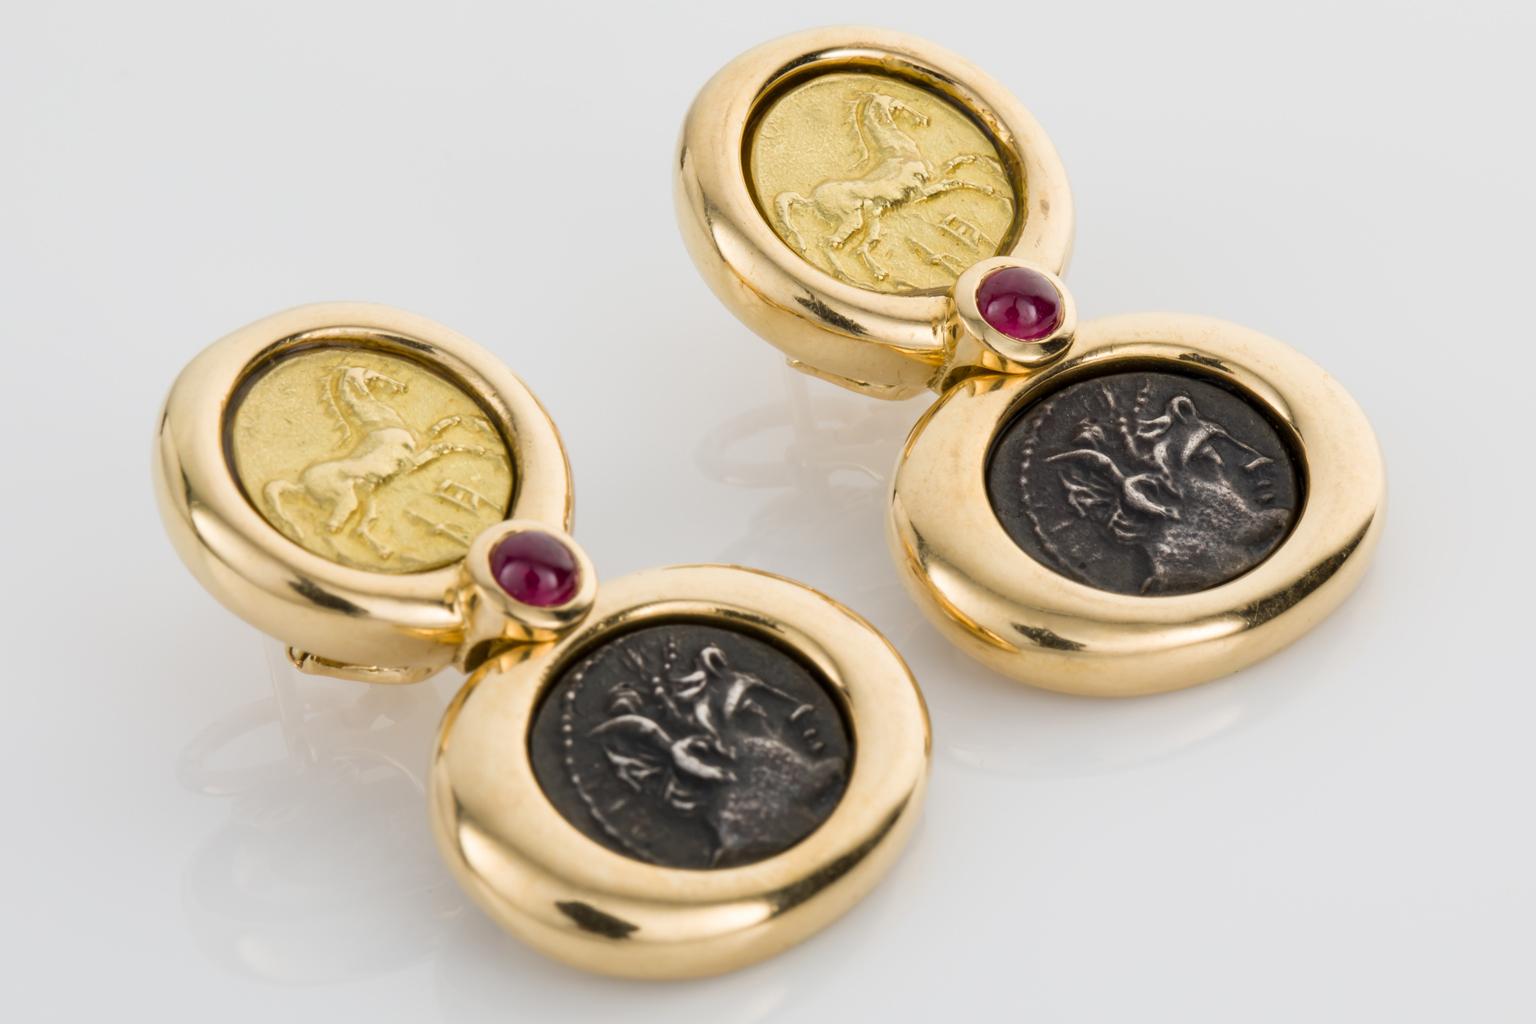 Wow look at these amazing earrings! Featuring French coins as the centrepieces, they are crafted from 22k & 18k yellow gold and silver. Depicting horses on the top 22k yellow gold coins and a mythical warrior on the lower silver coins, these are all